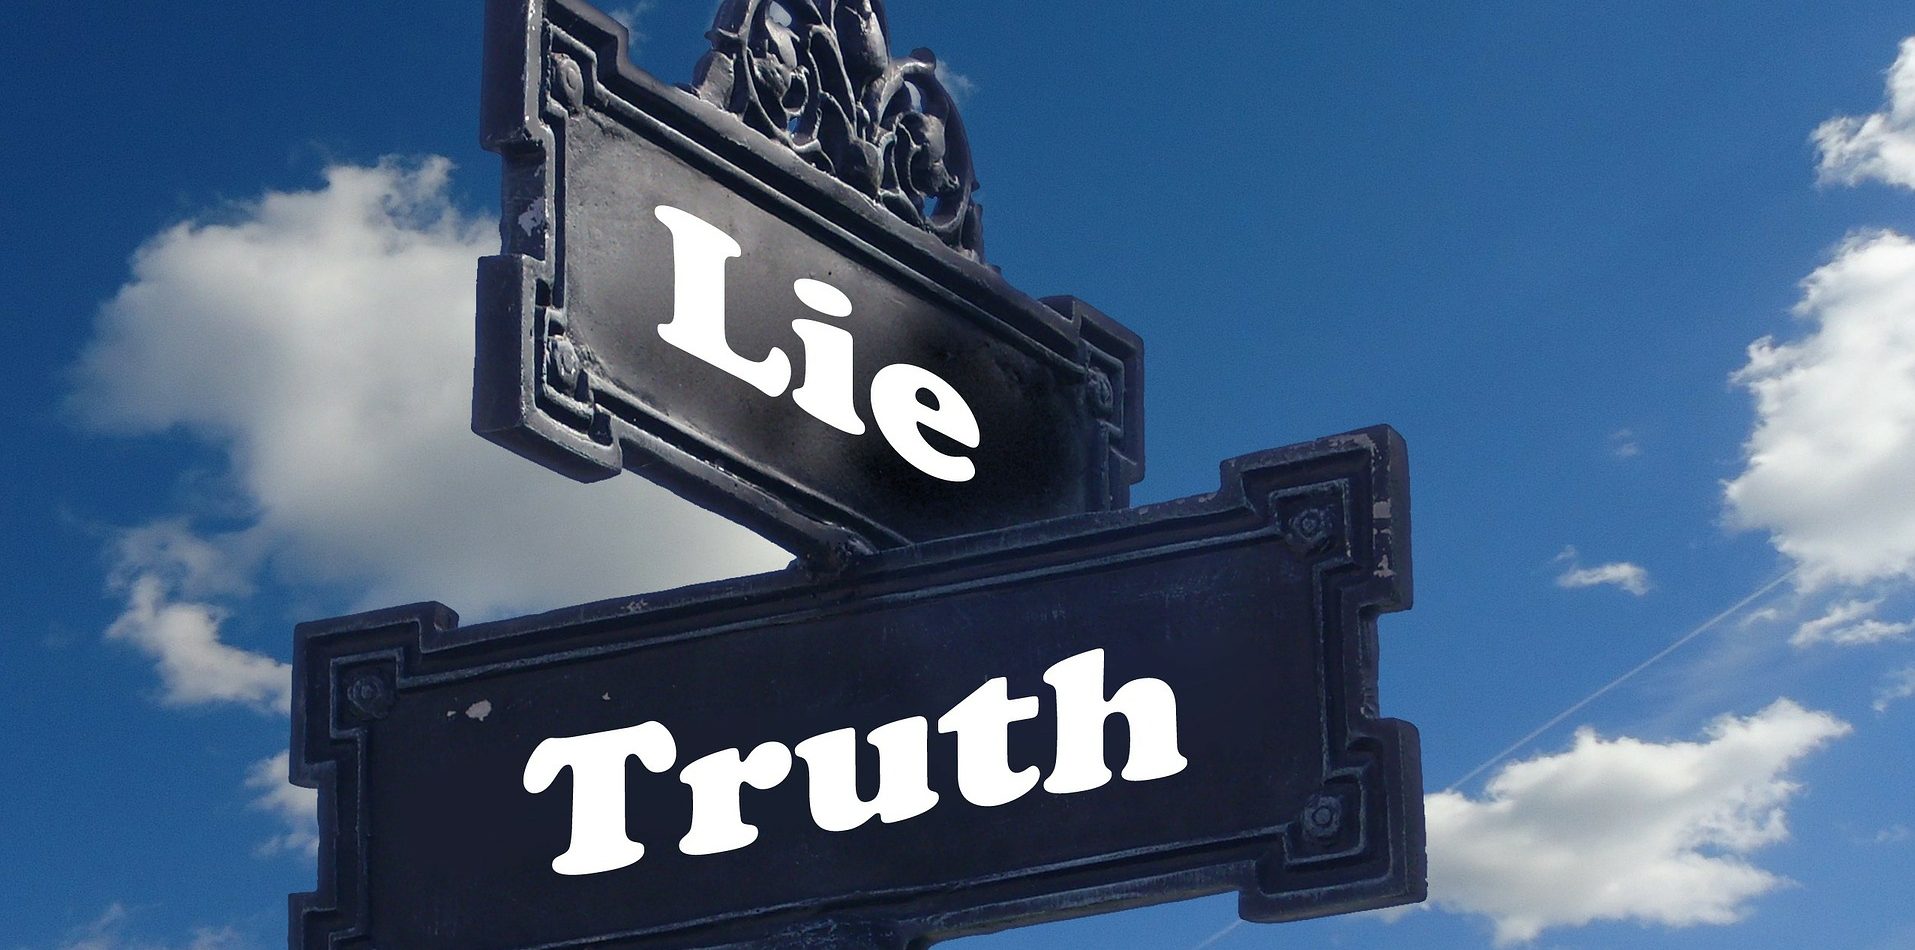 Eating Disorder Lies Truth Sign